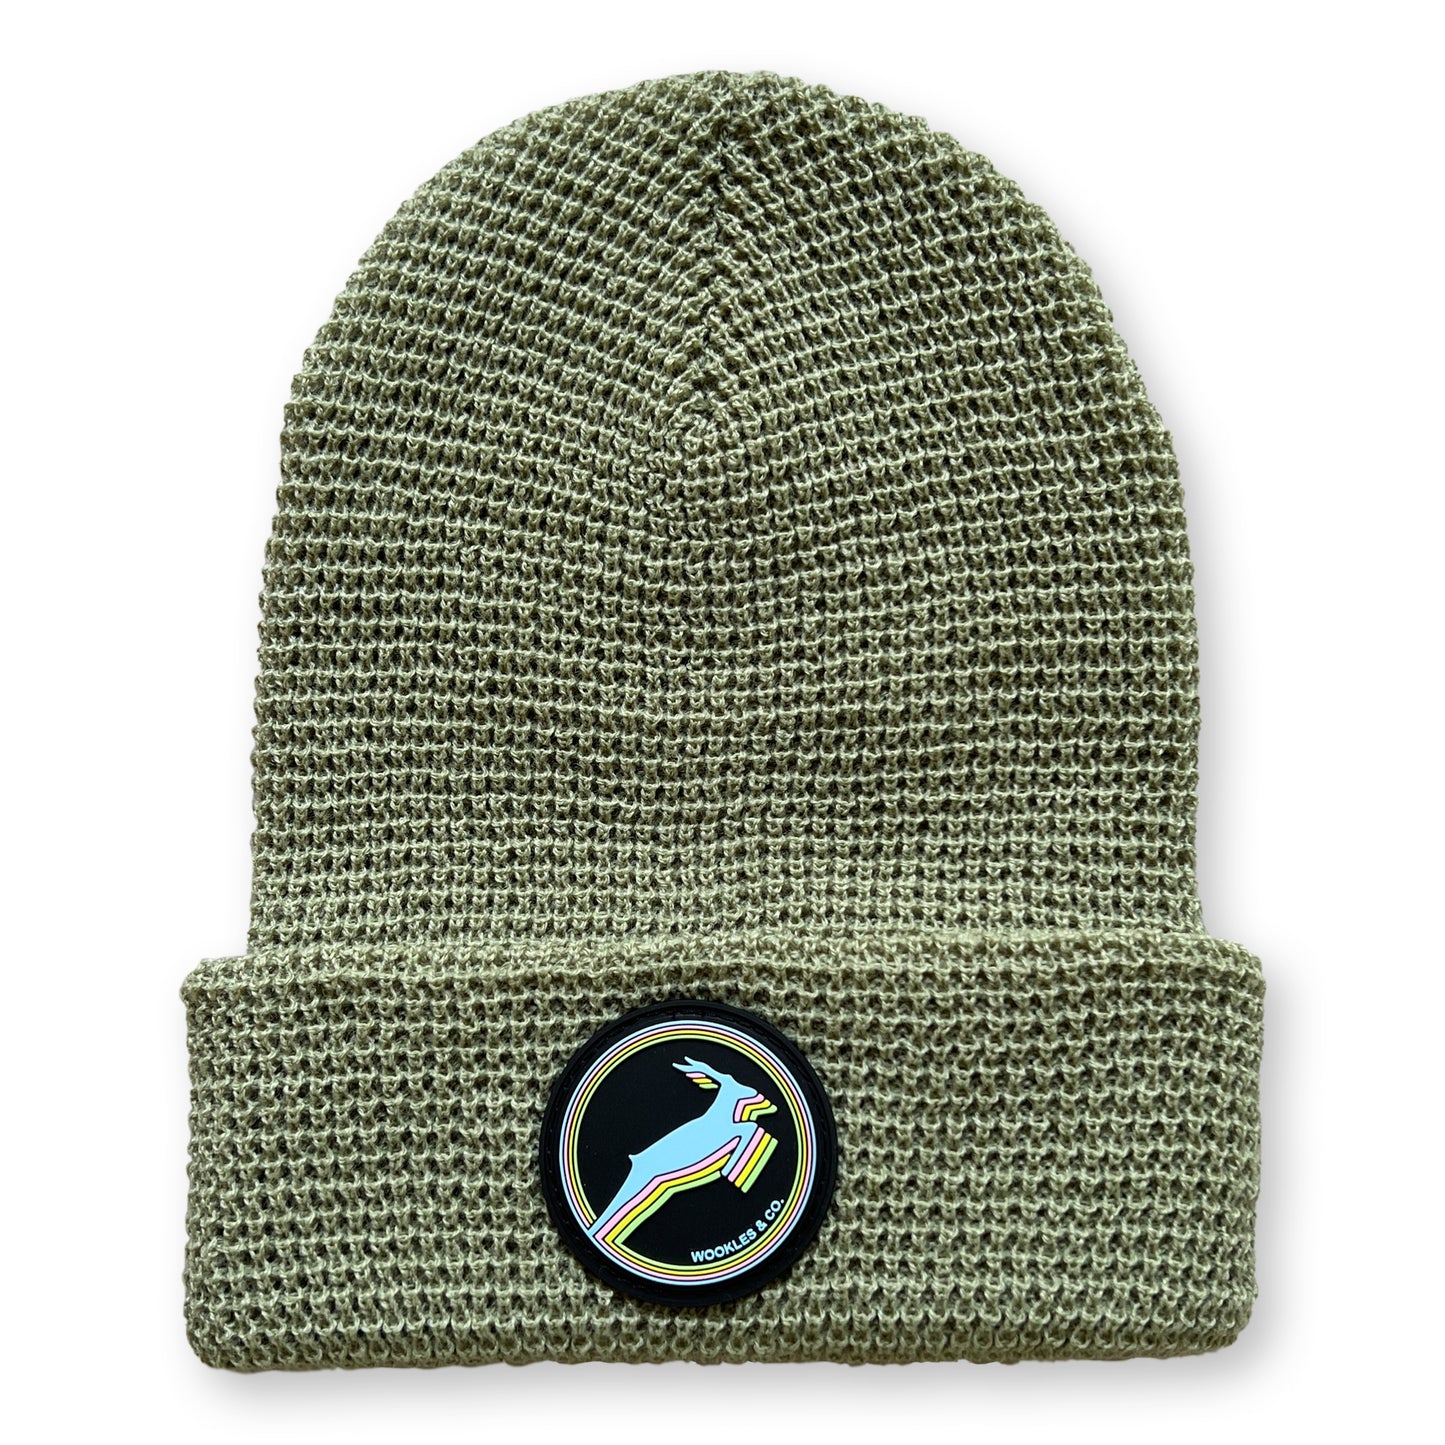 Antelope Waffle Knit Beanie in Sage